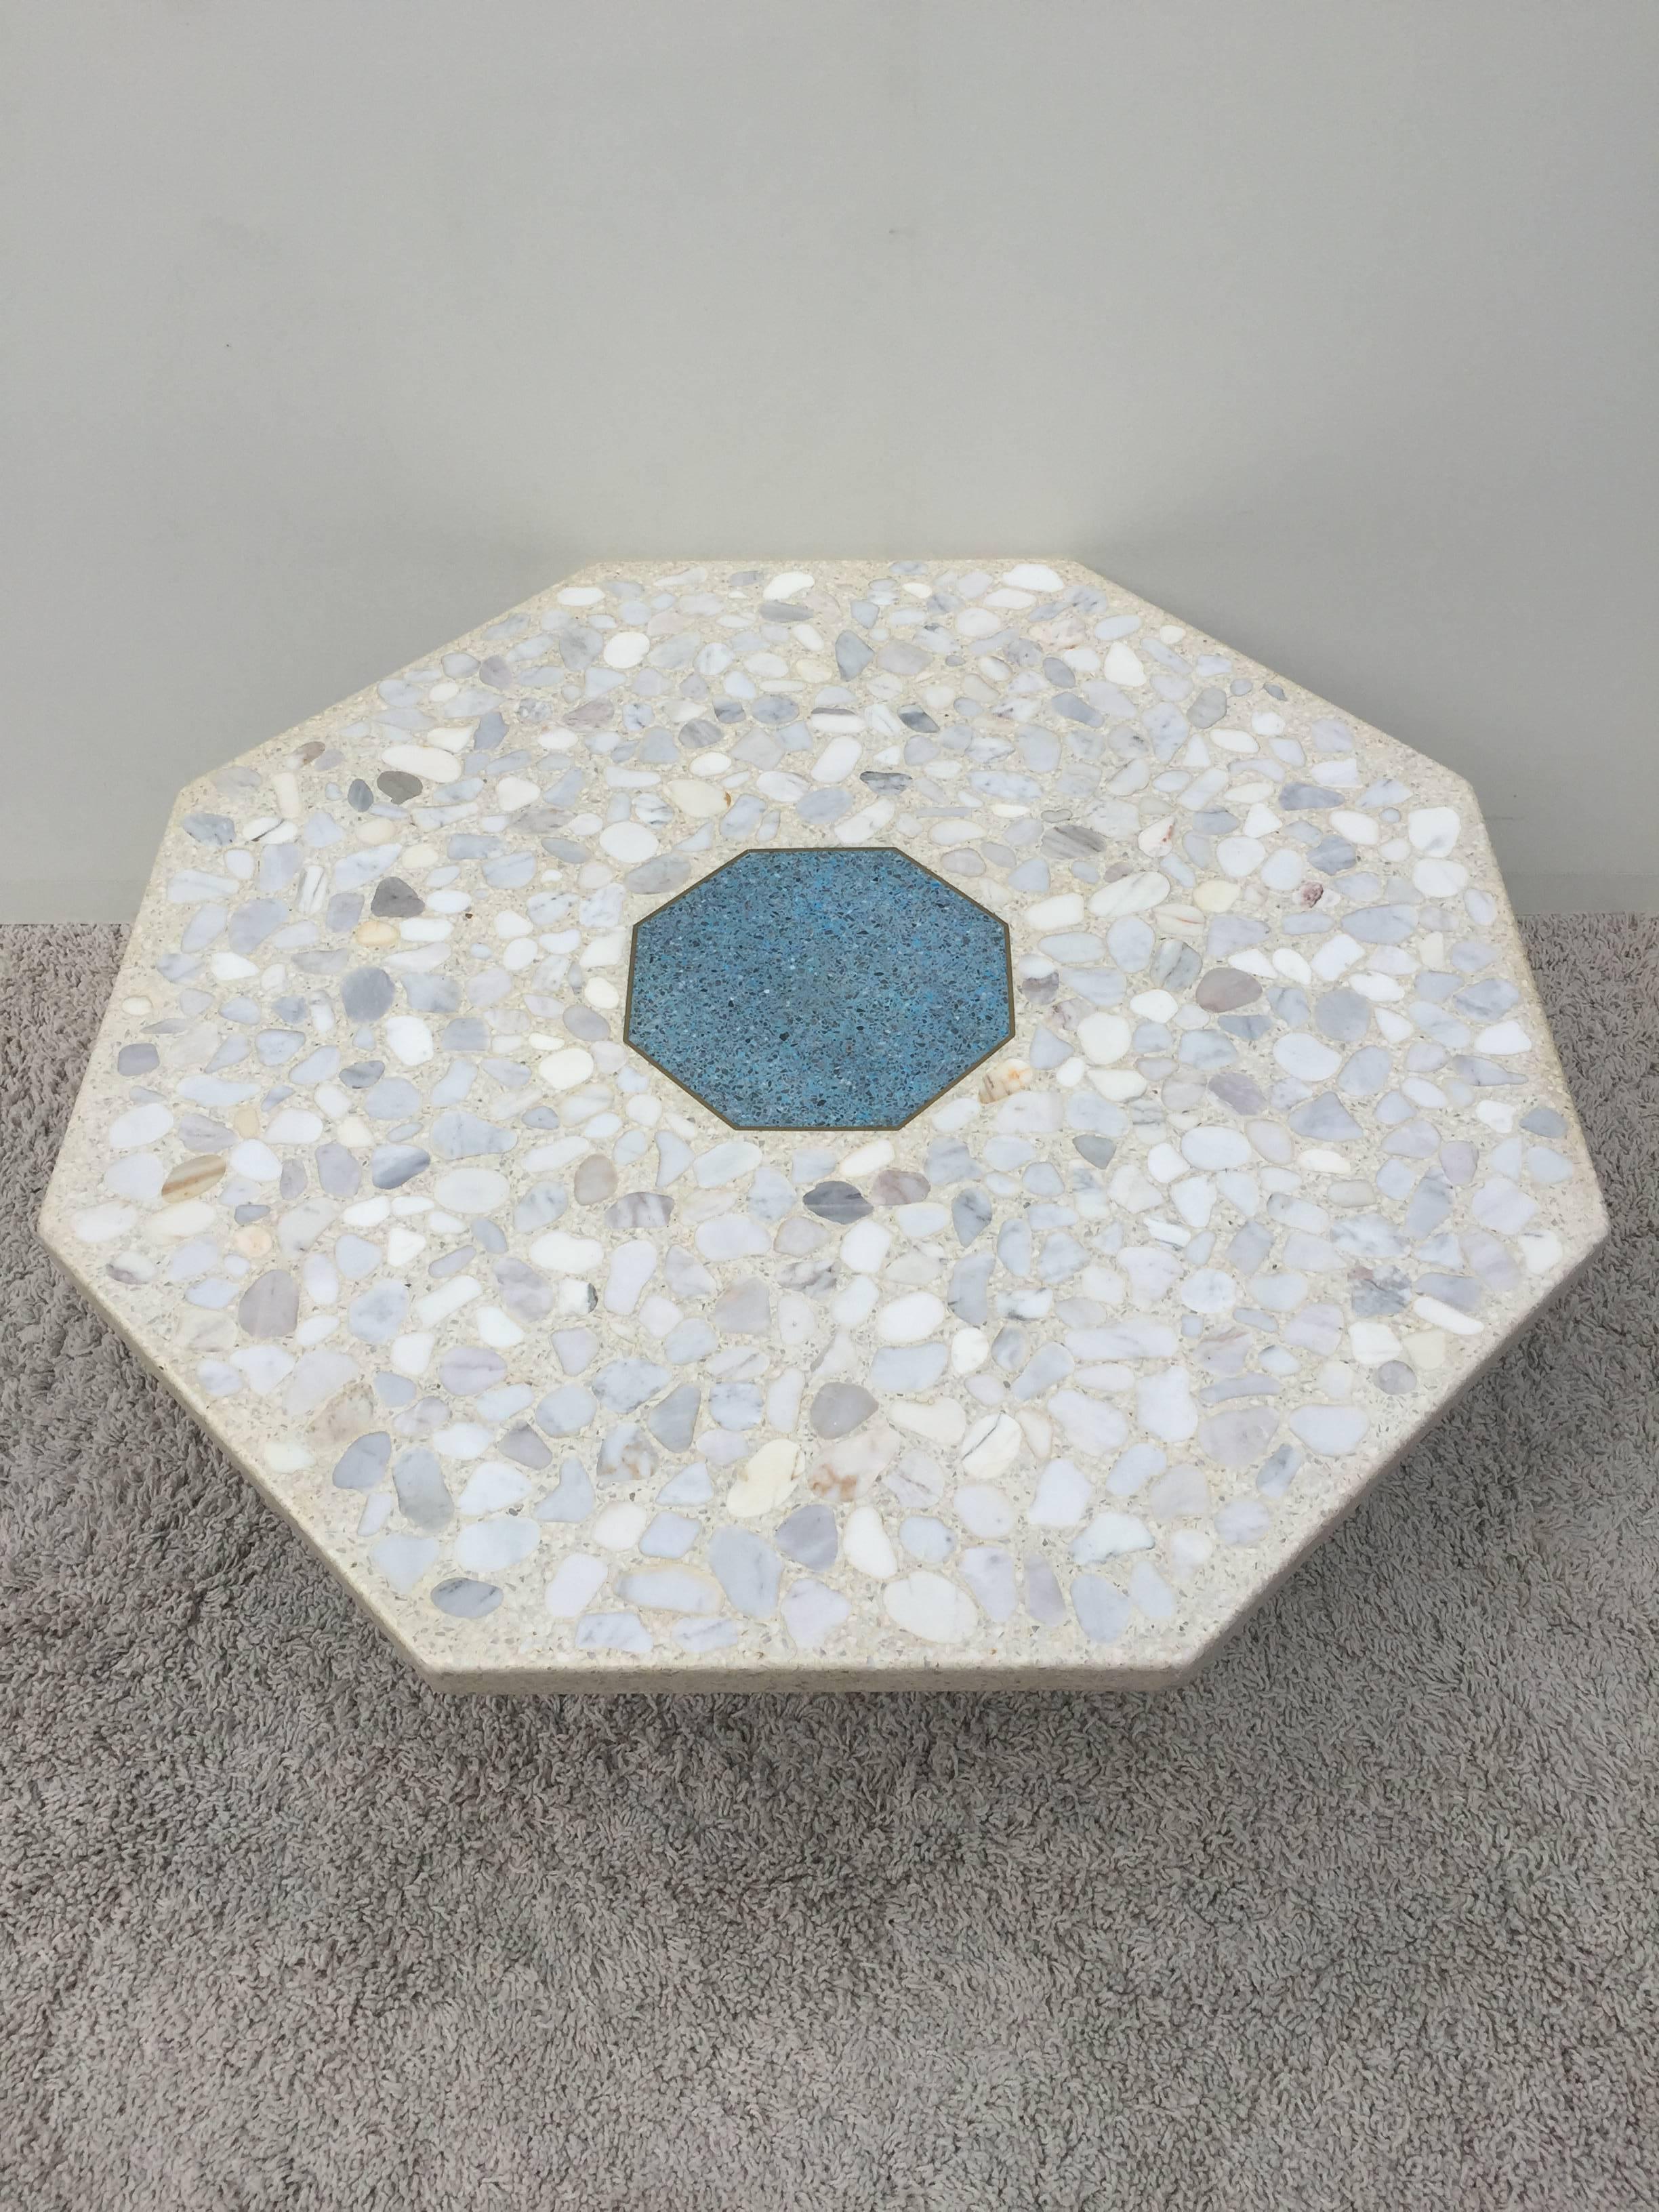 Harvey Probber Terrazzo Inlaid Turquoise Centre Coffee Table or Cocktail Table 1